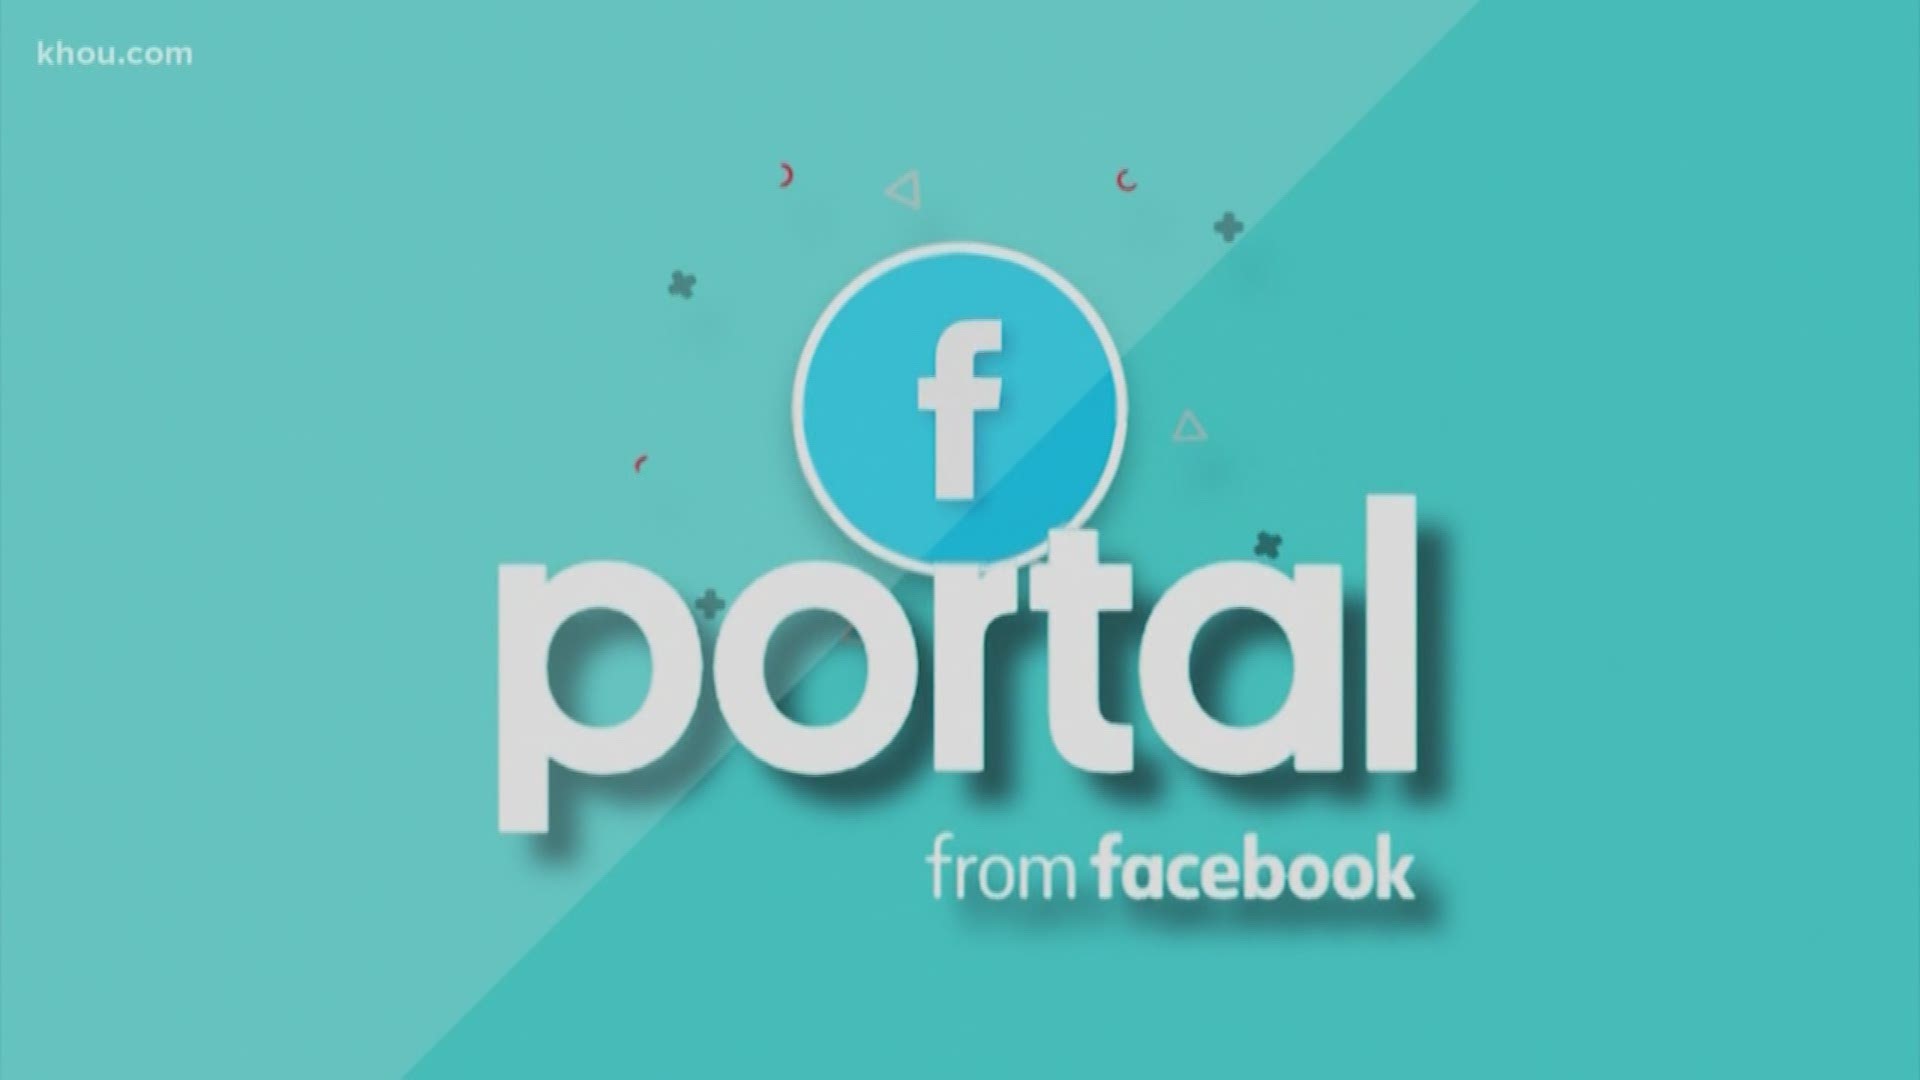 Facebook is upping its video calling game with a new gadget called Portal.  It's a smart, hands-free video calling device from Facebook.